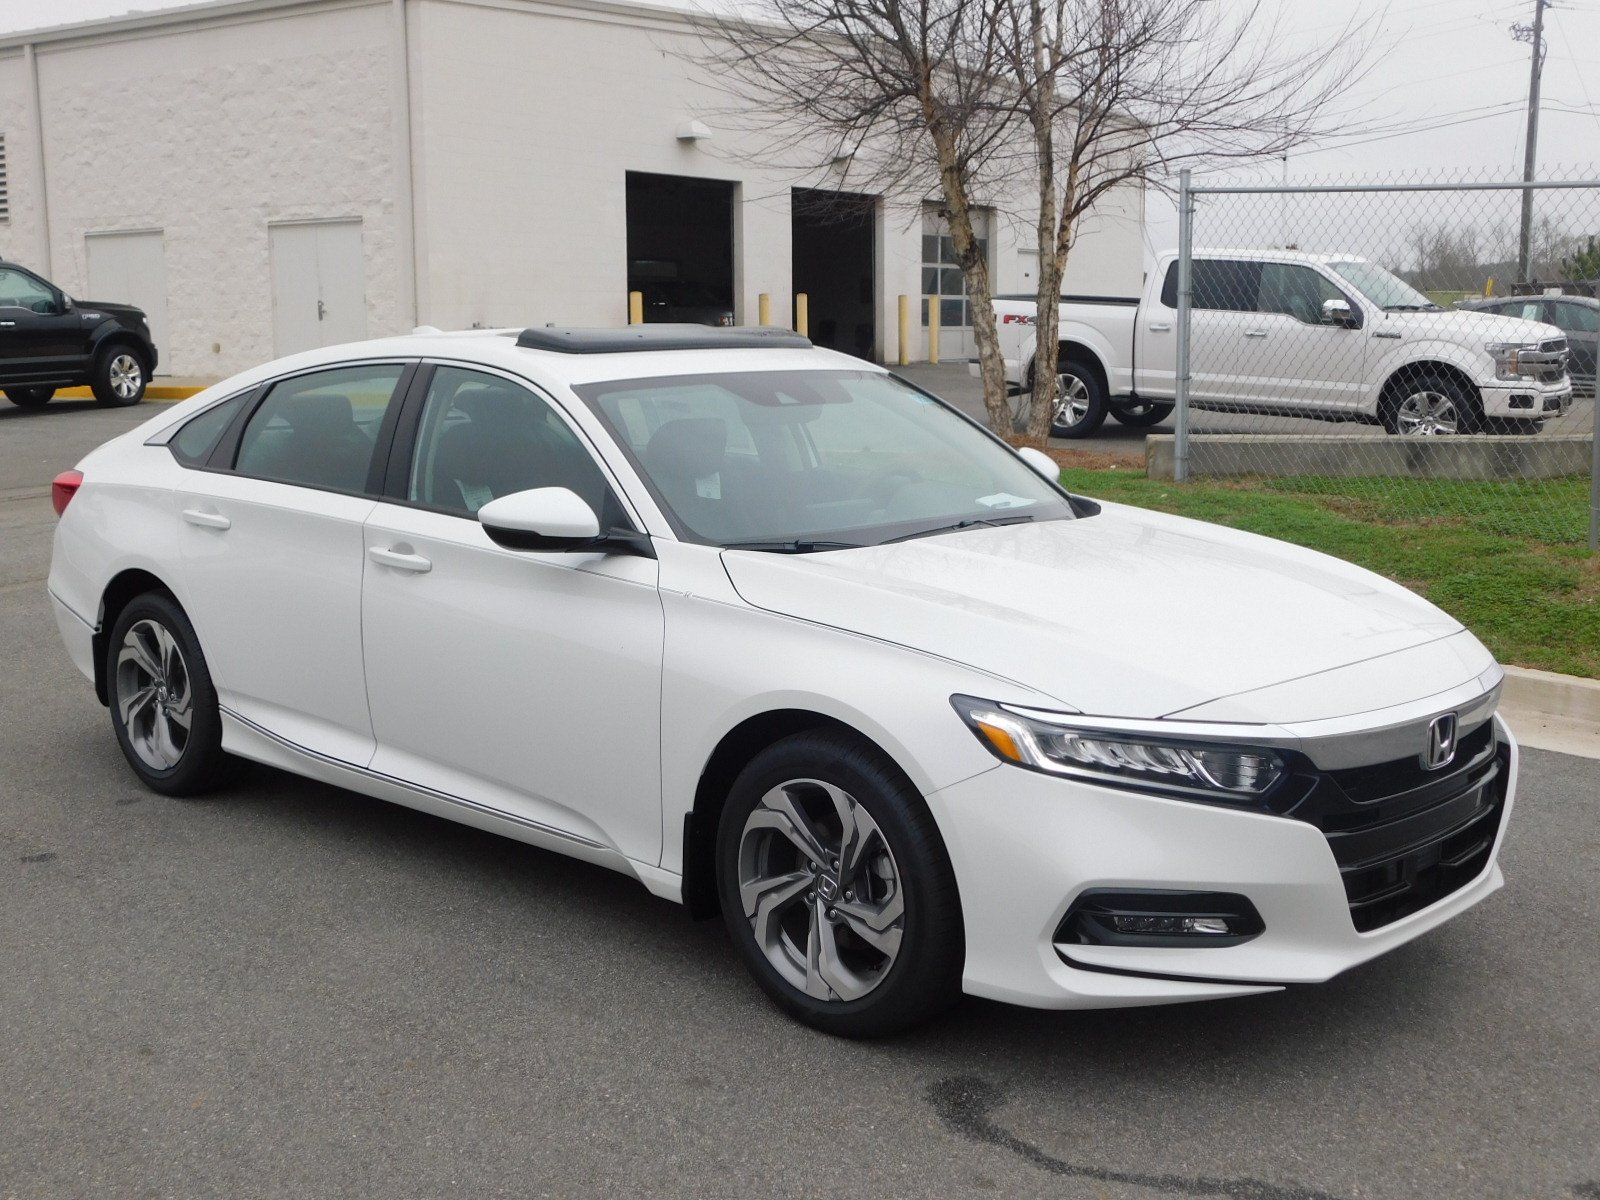 New 2018 Honda Accord EX-L 1.5T 4dr Car in Milledgeville #H18209